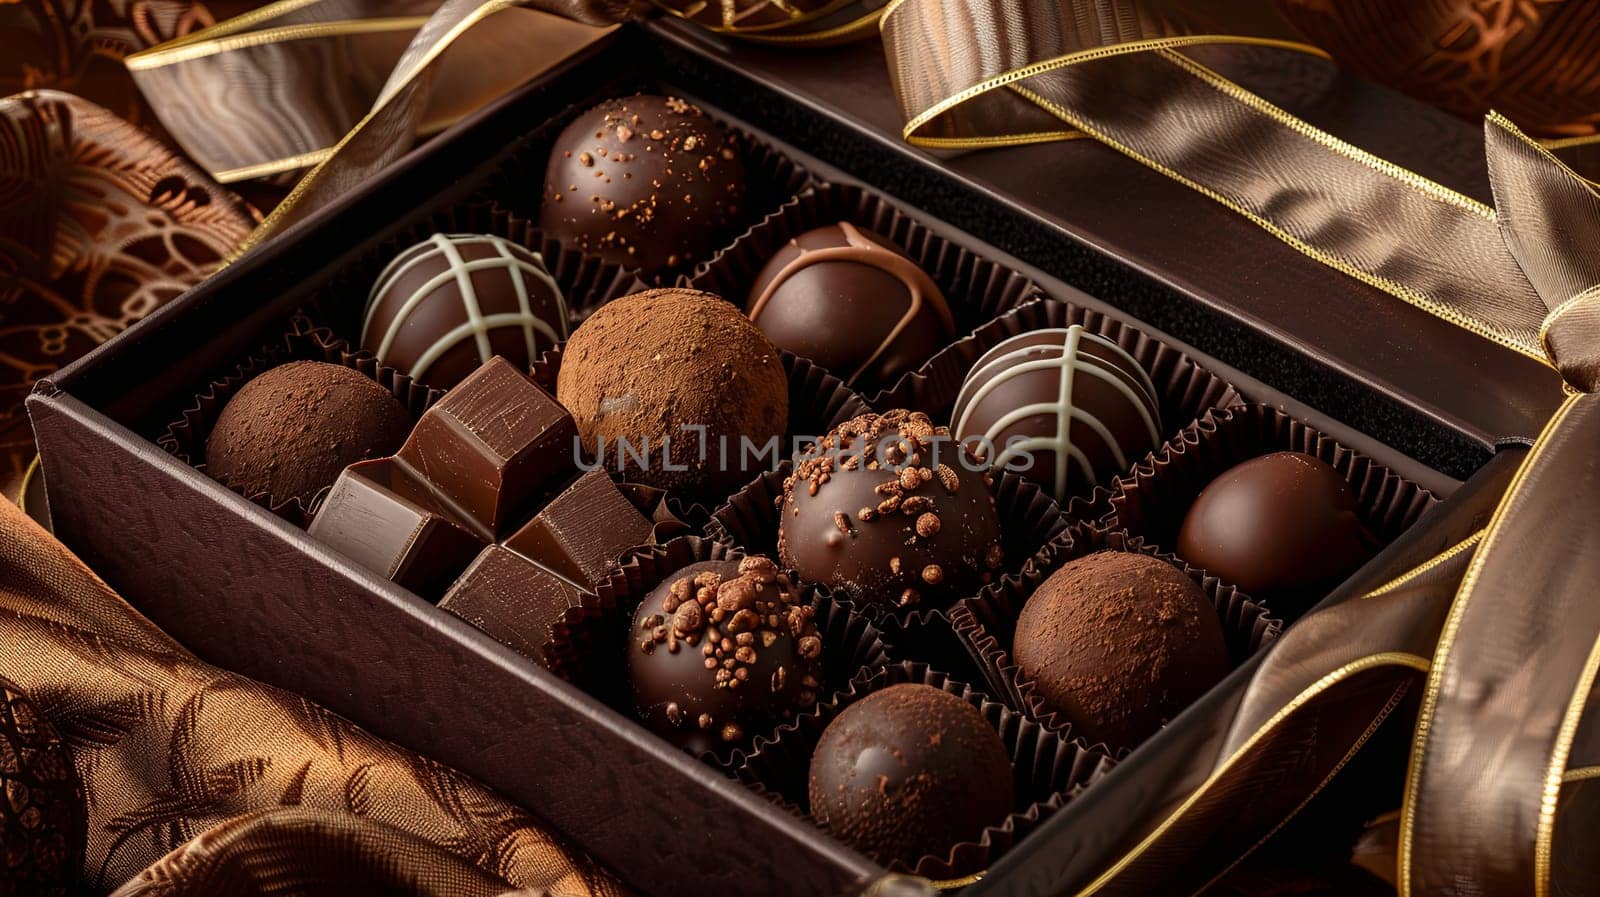 A high-detail box of chocolate truffles with a luxurious presentation, adorned with elegant ribbons in rich dark colors.